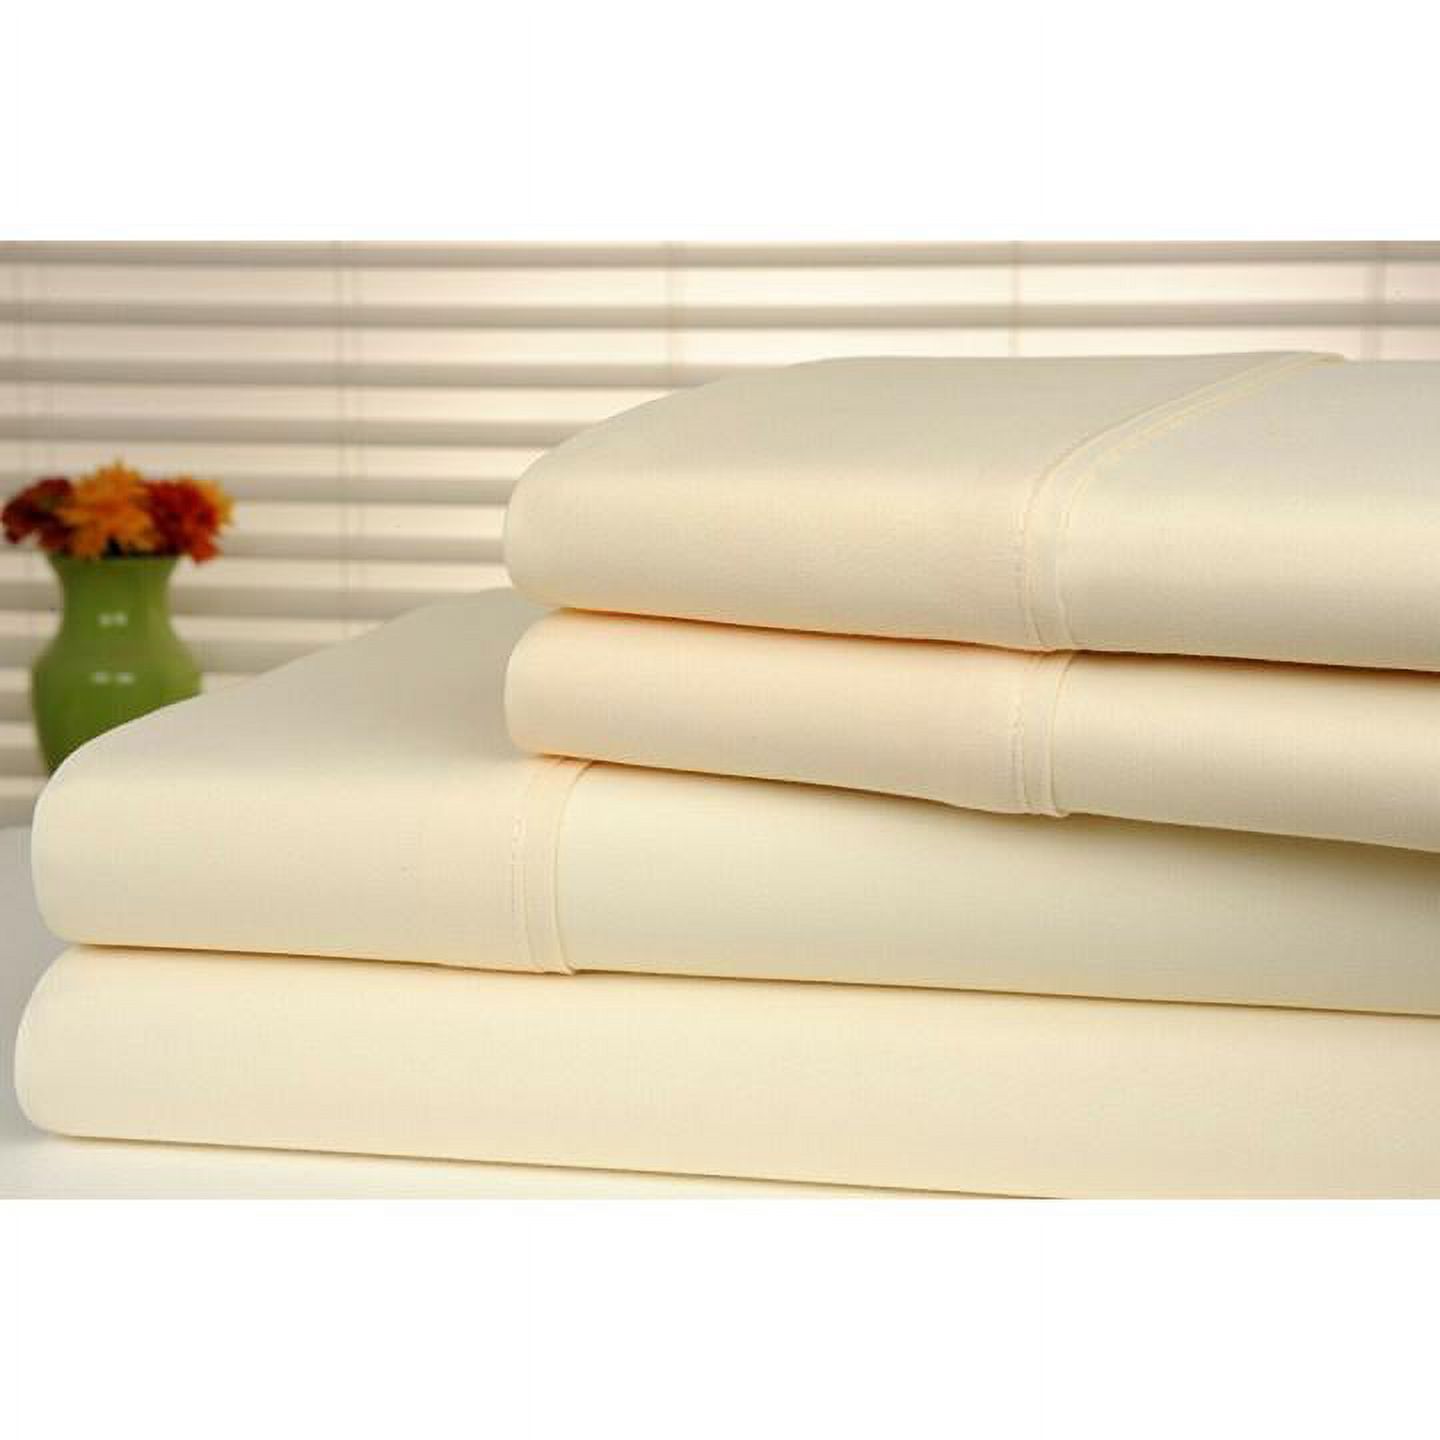 Bamboo Comfort  King Size Bamboo Luxury Solid Sheet Set, White - 4 Piece - image 15 of 21